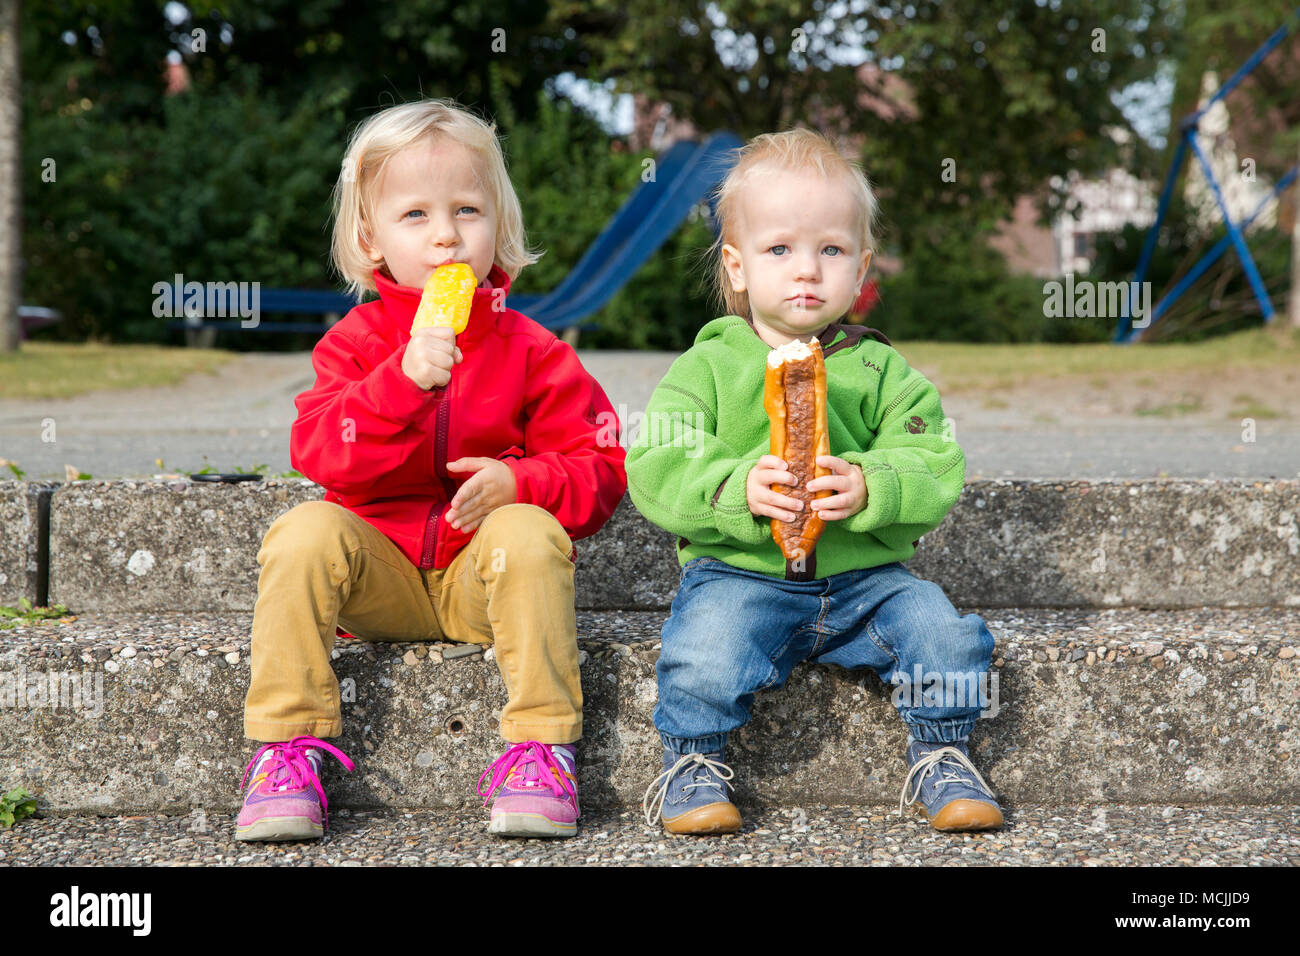 Infants, siblings, sitting on stairs eating ice cream and pretzel sticks Stock Photo